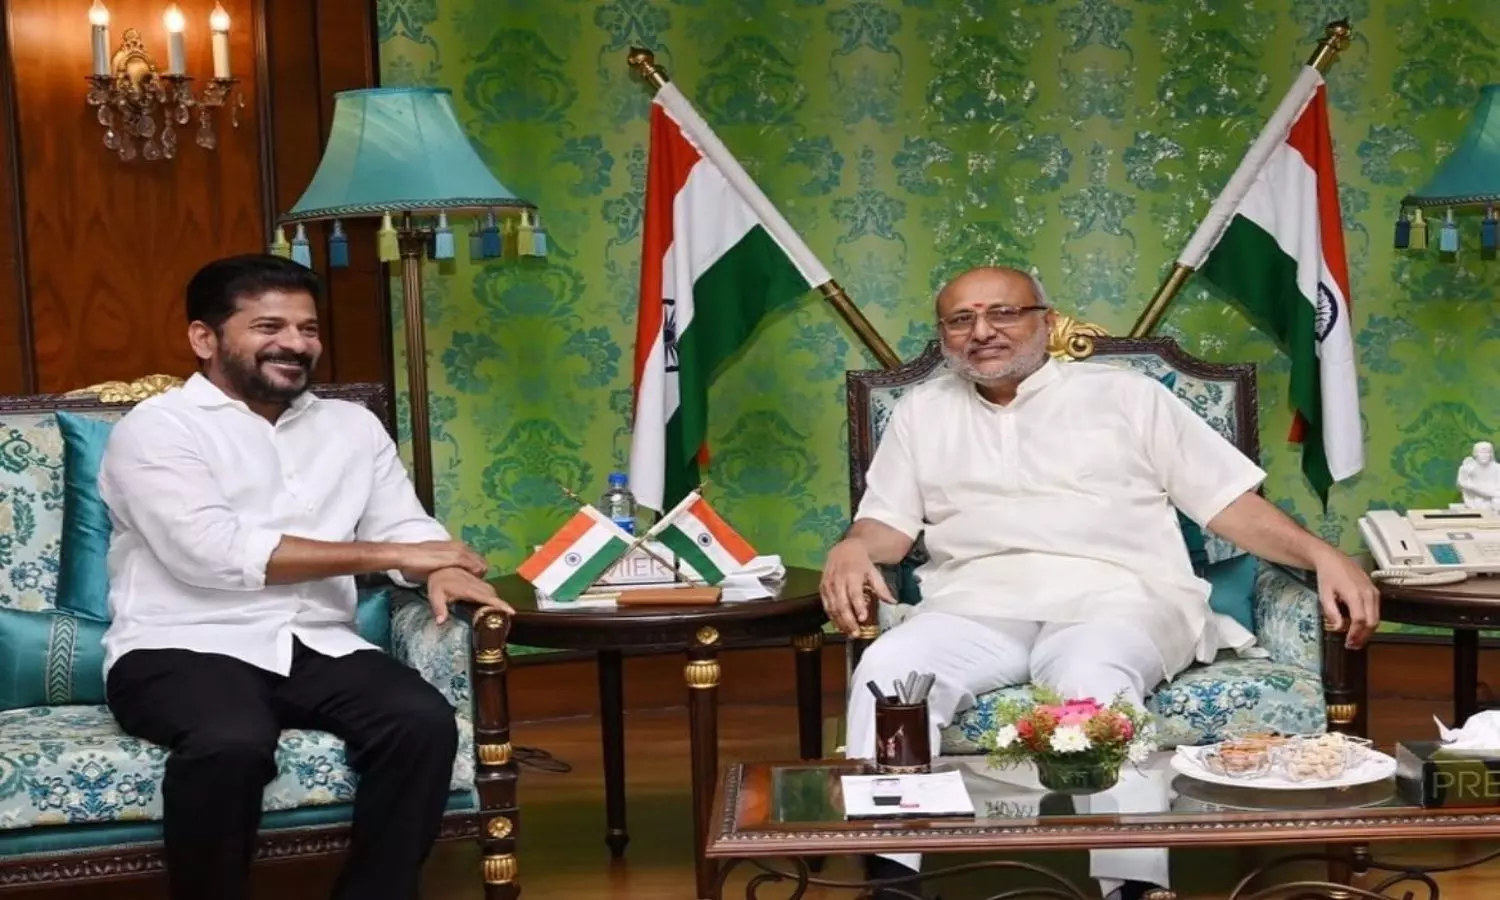 CM Revanth Reddy met with the Governor